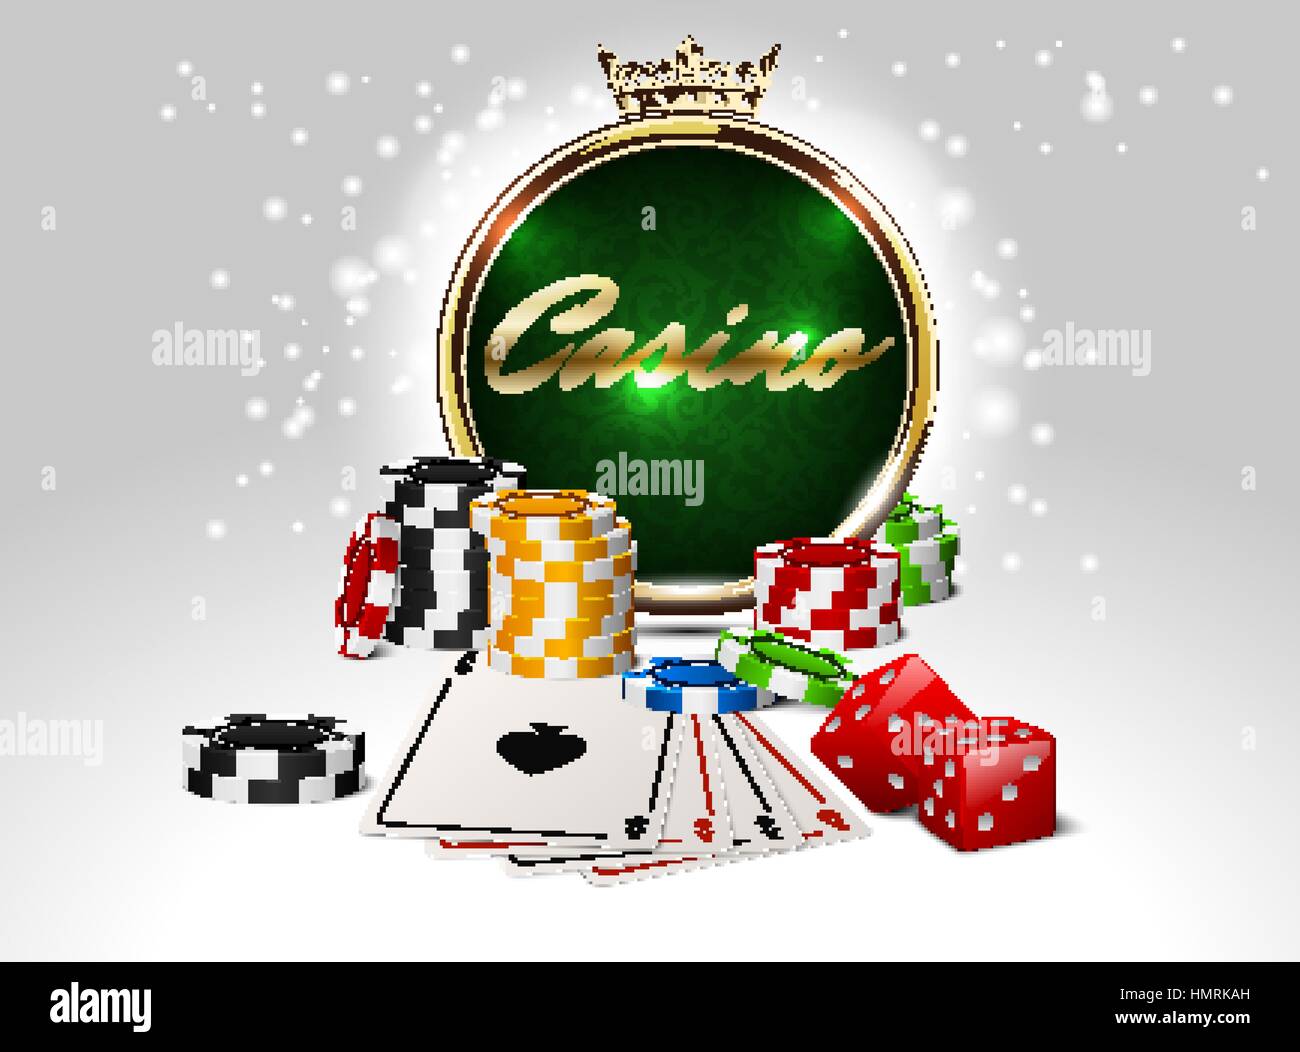 Round casino golden frame with crown, stack of poker chips, ace cards and red dice on green background. Online club emblem Stock Vector